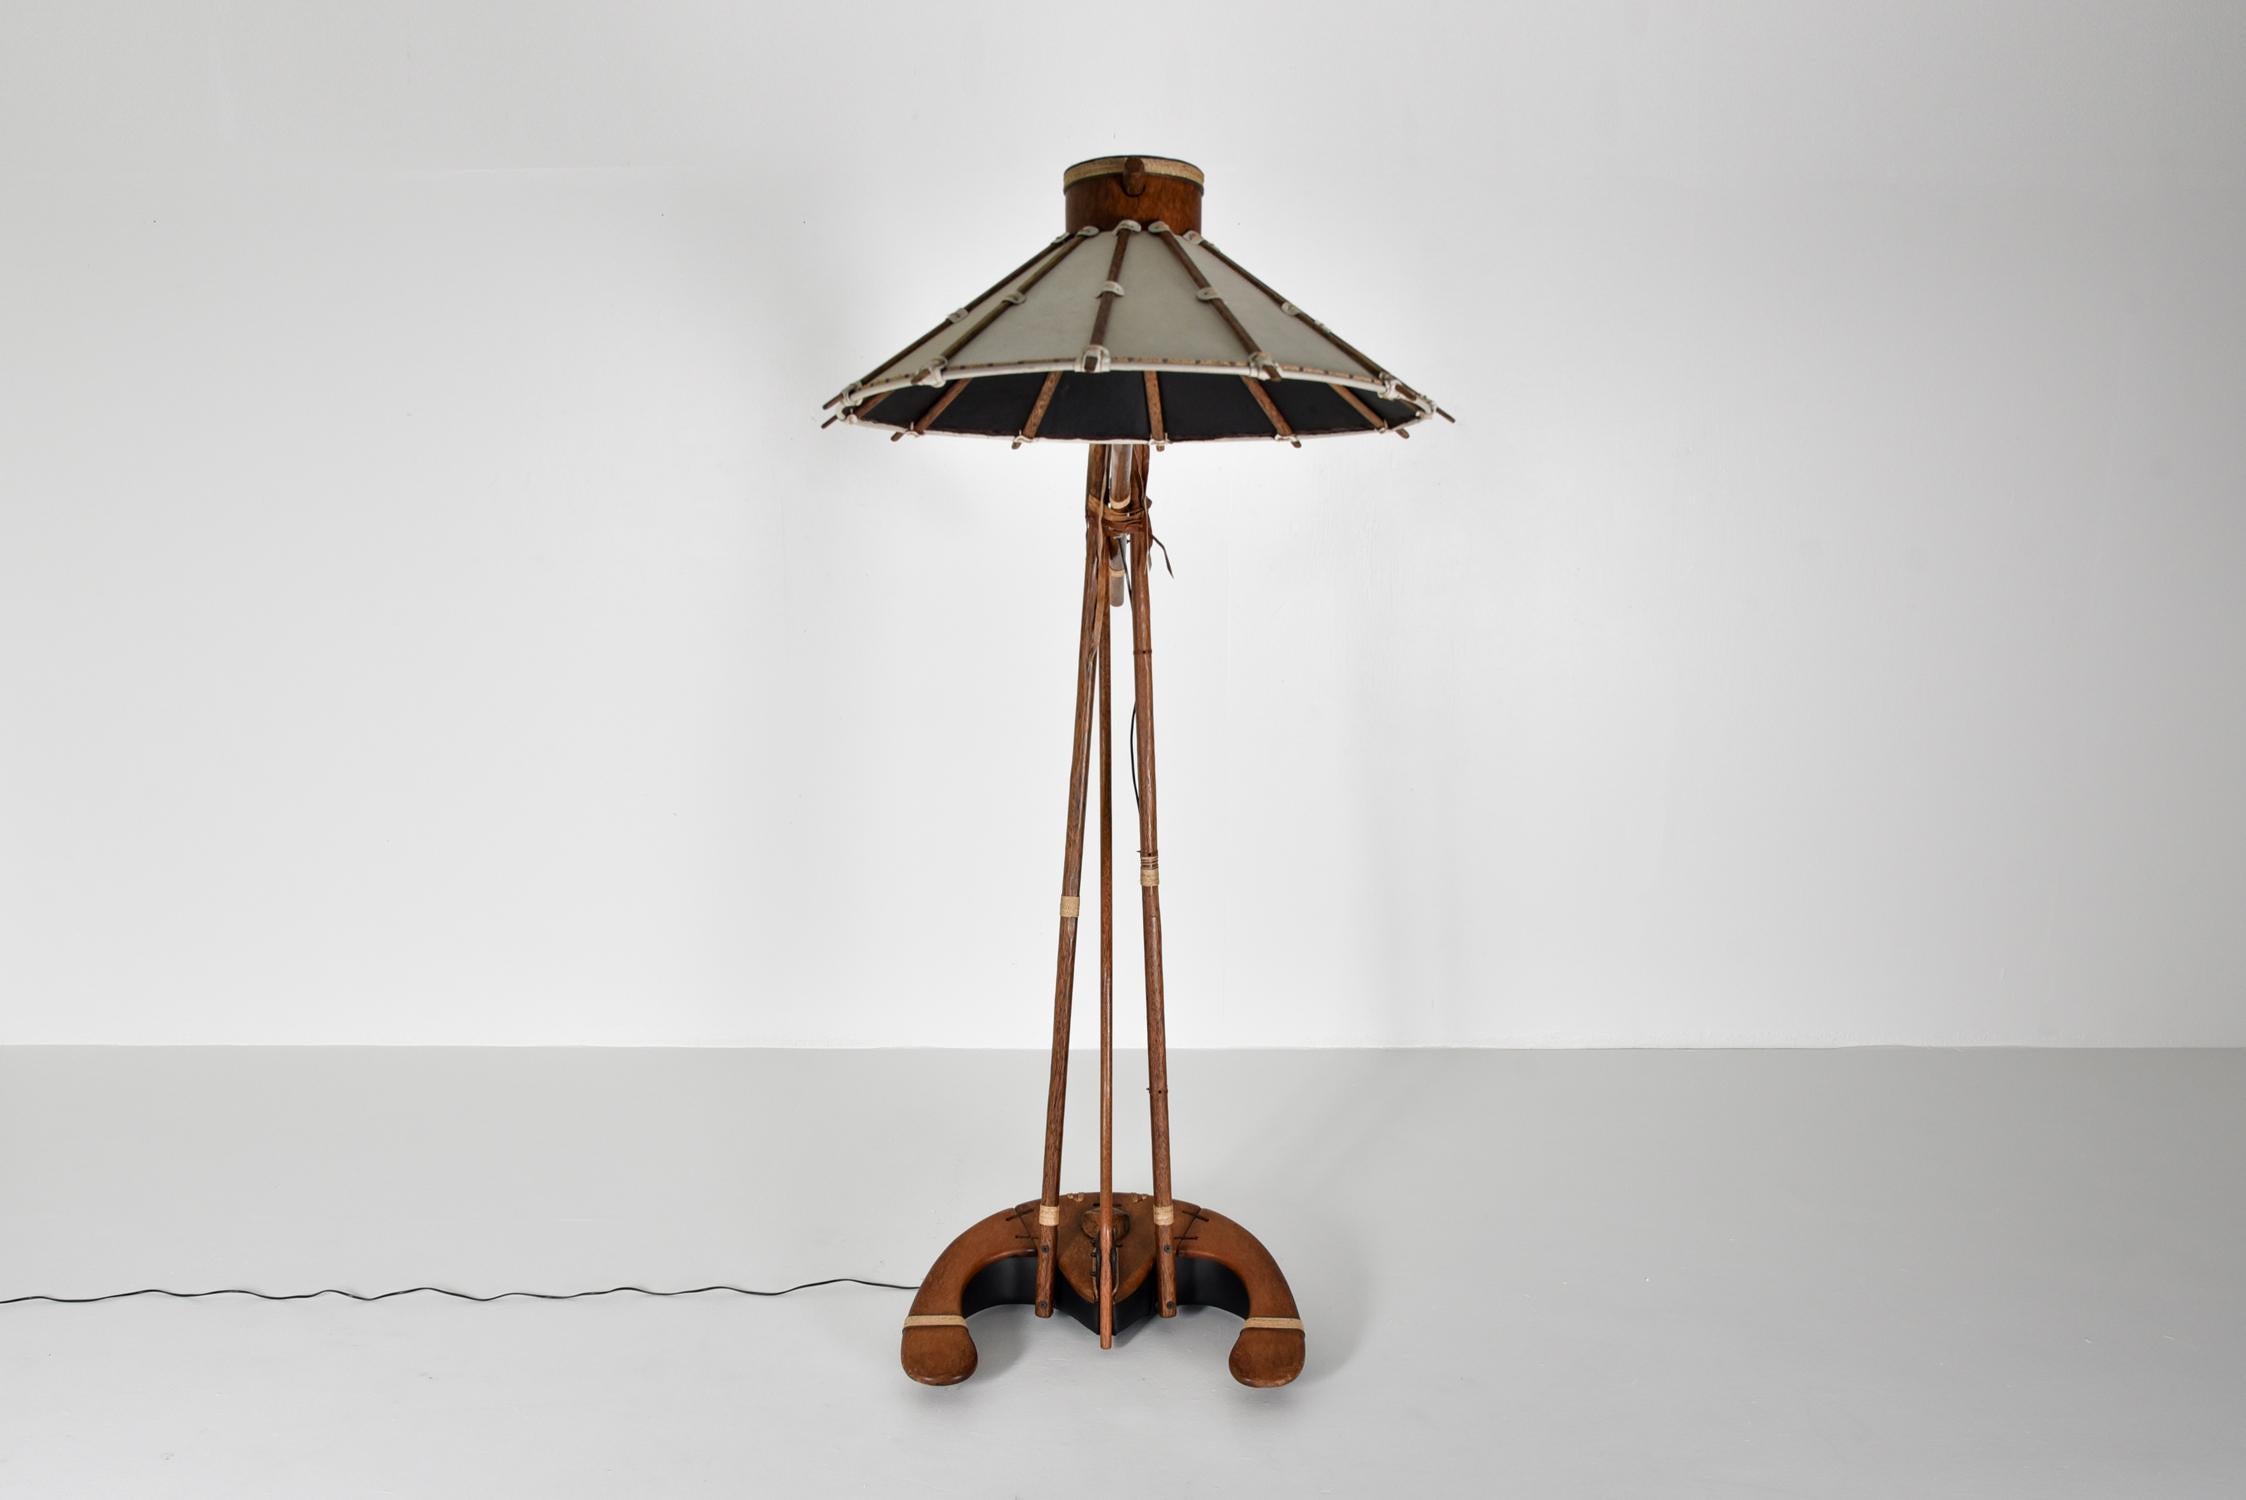 Ethnic inspired huge floor lamp by an unknown artist, Europe, 1990s

The craft and materials used are high-end. 
Solid palm wood sticks bound together with rope and leather strings provide an ethnic and primitive feel.
Don't be fooled by the